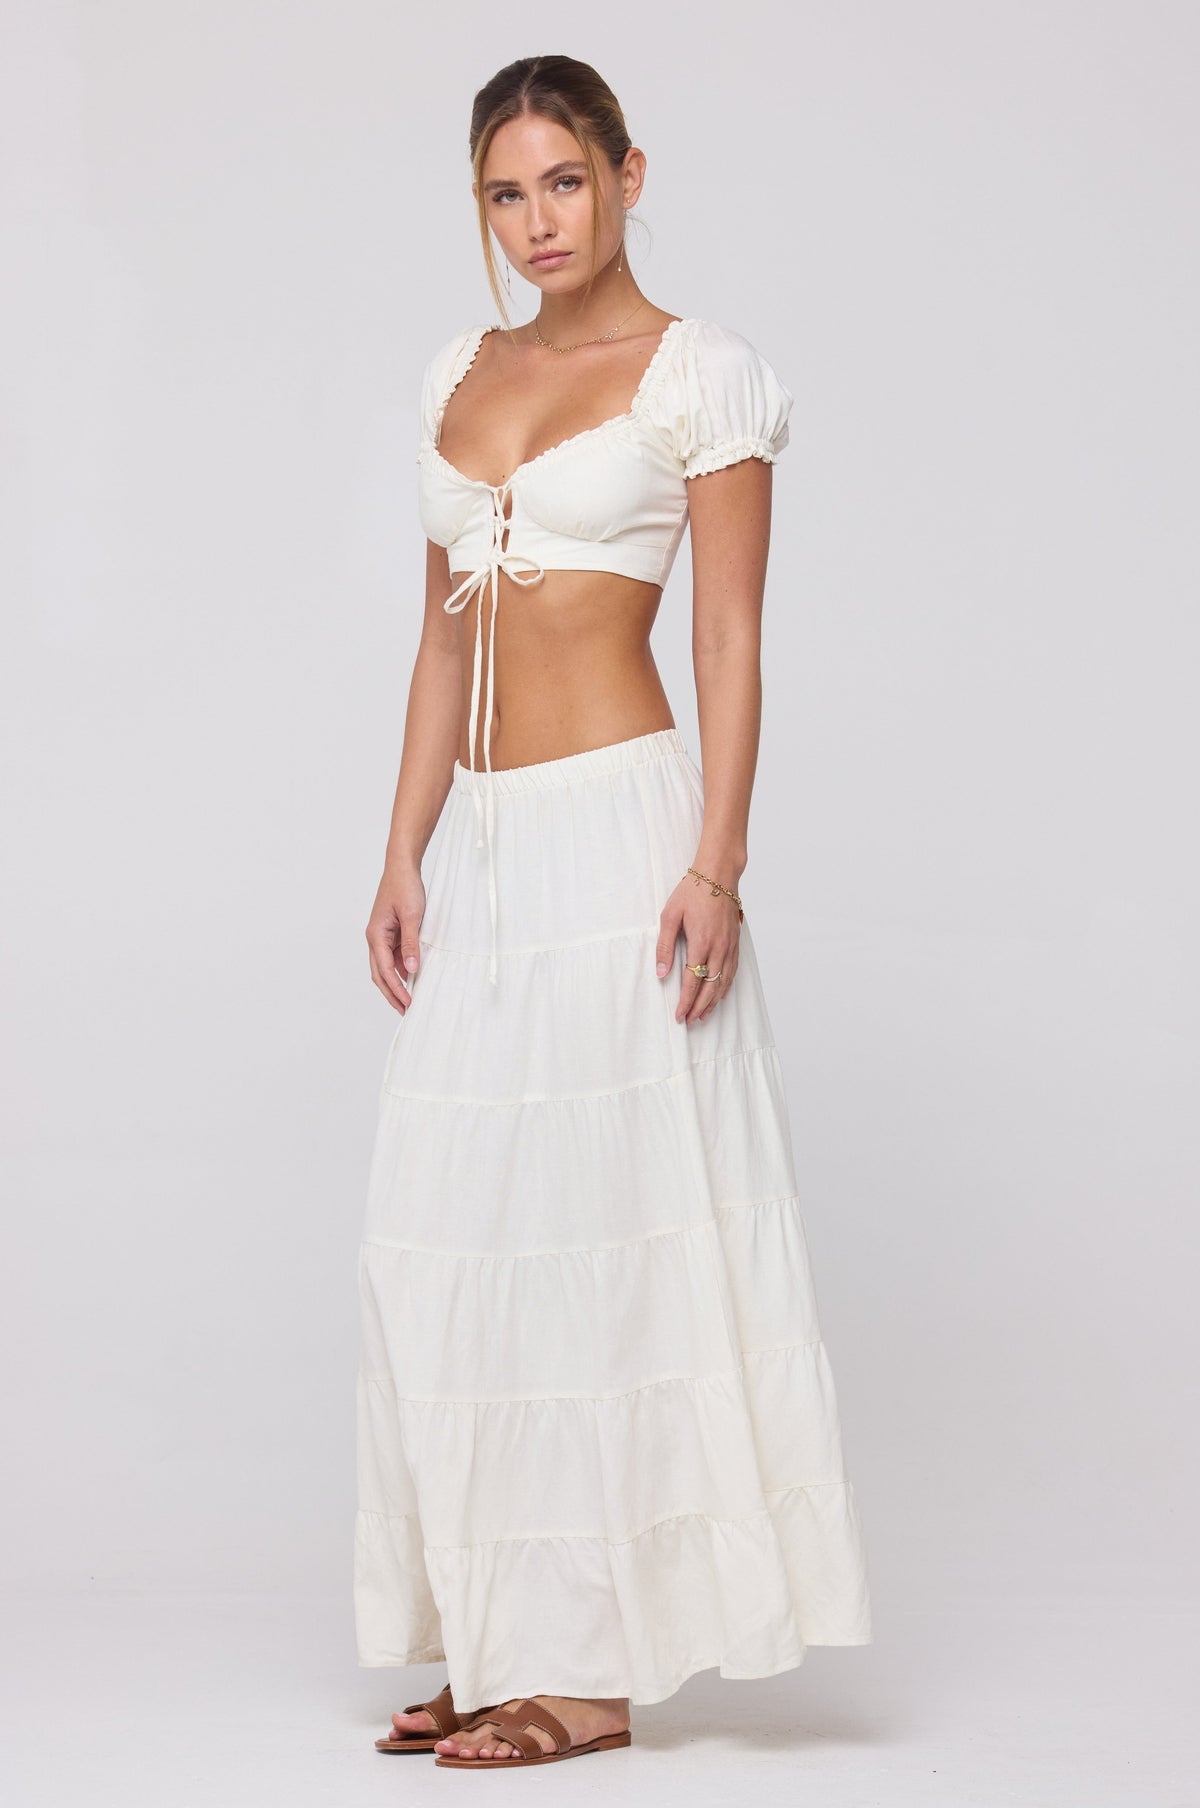 This is an image of Juliana Skirt in White Linen - RESA featuring a model wearing the dress